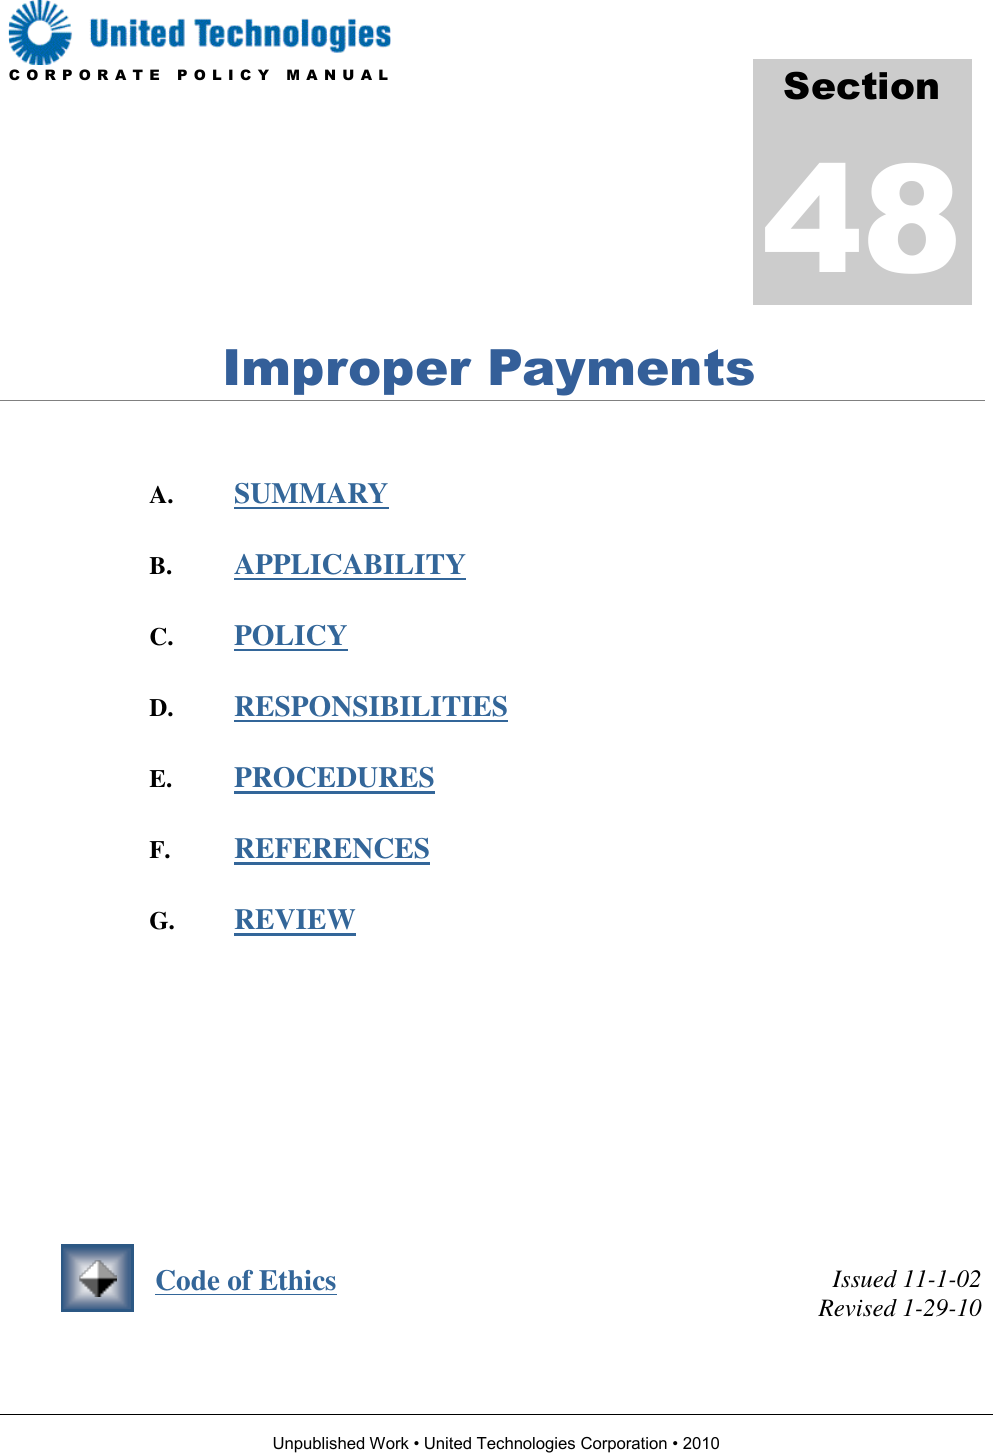 Page 1 of 6 - Corporate Policy Manual Section 48 - Business Practices Organization Improper Payments English